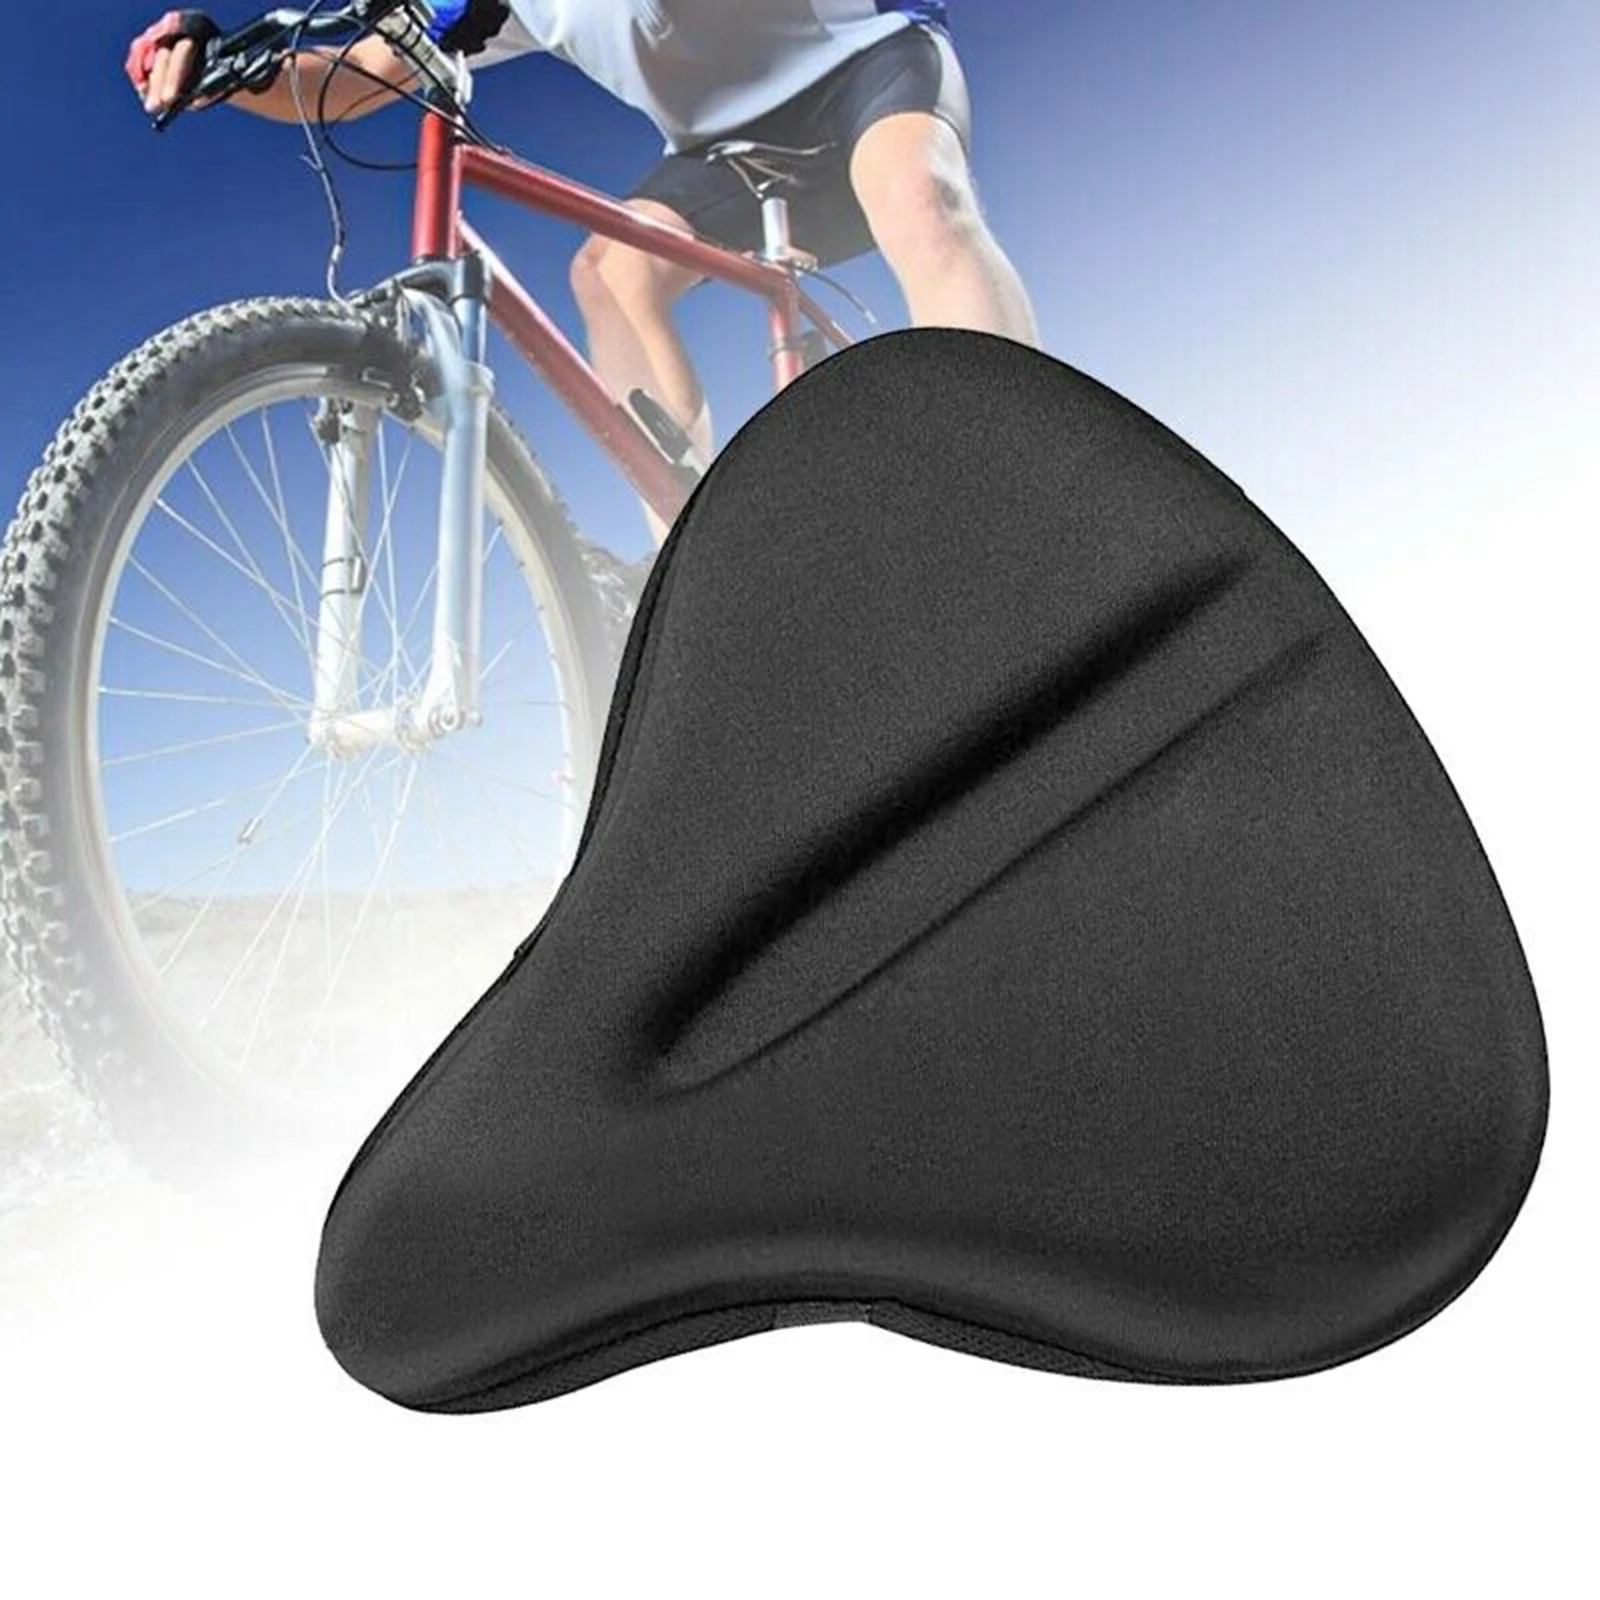 Bike Seat Cushion Cover, Padded Gel Bike Seat Covers Bicycle Saddle Pad for